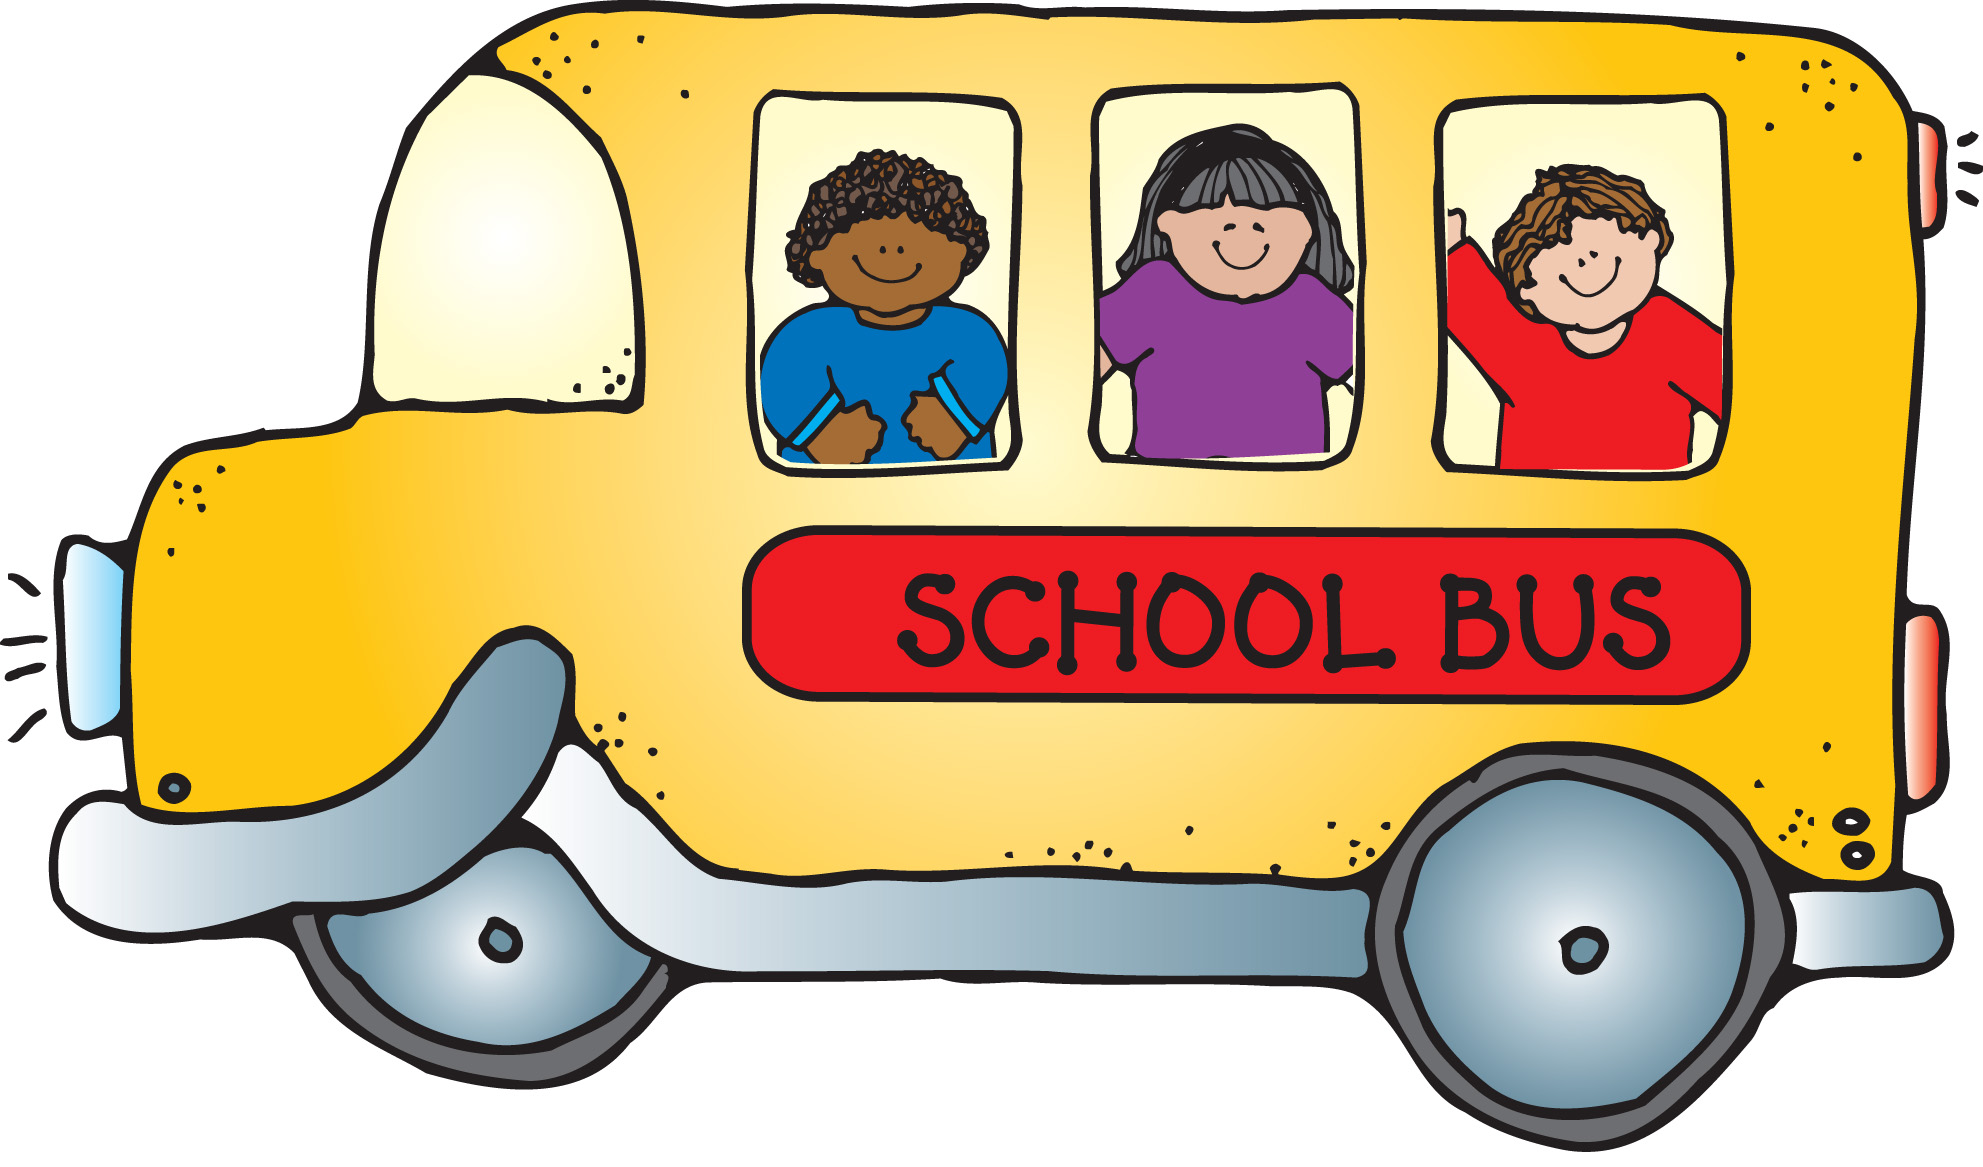 free clipart of school buses - photo #41